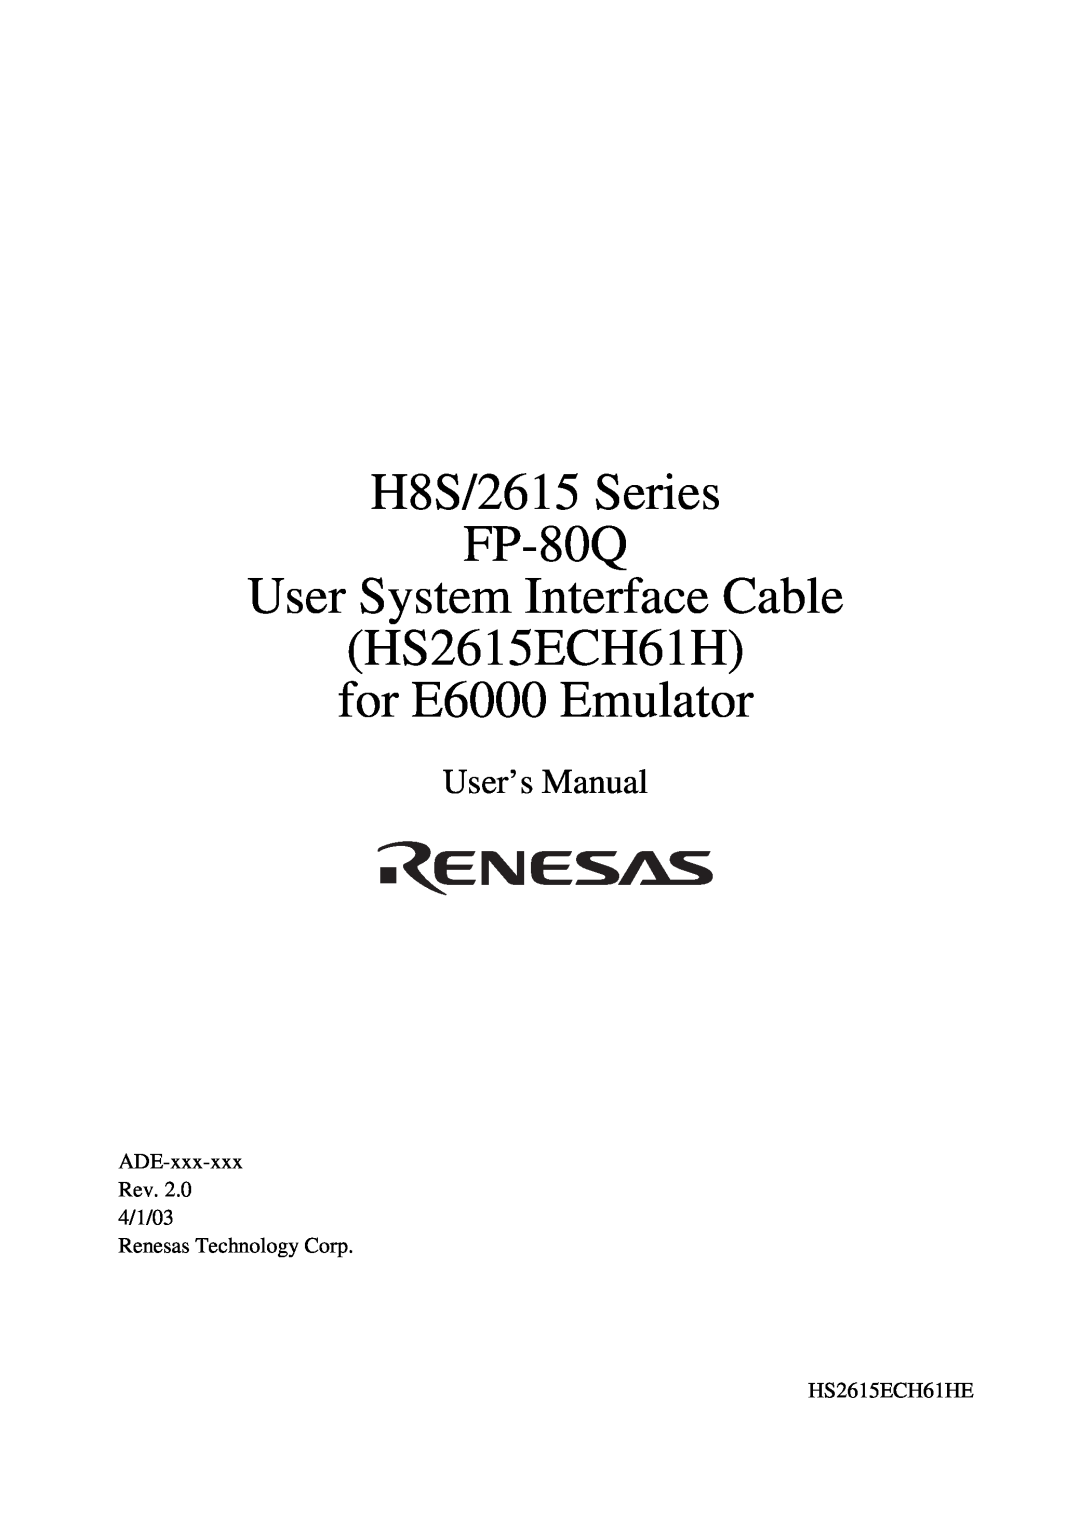 Renesas user manual User’s Manual, H8S/2615 Series FP-80Q User System Interface Cable, HS2615ECH61H for E6000 Emulator 